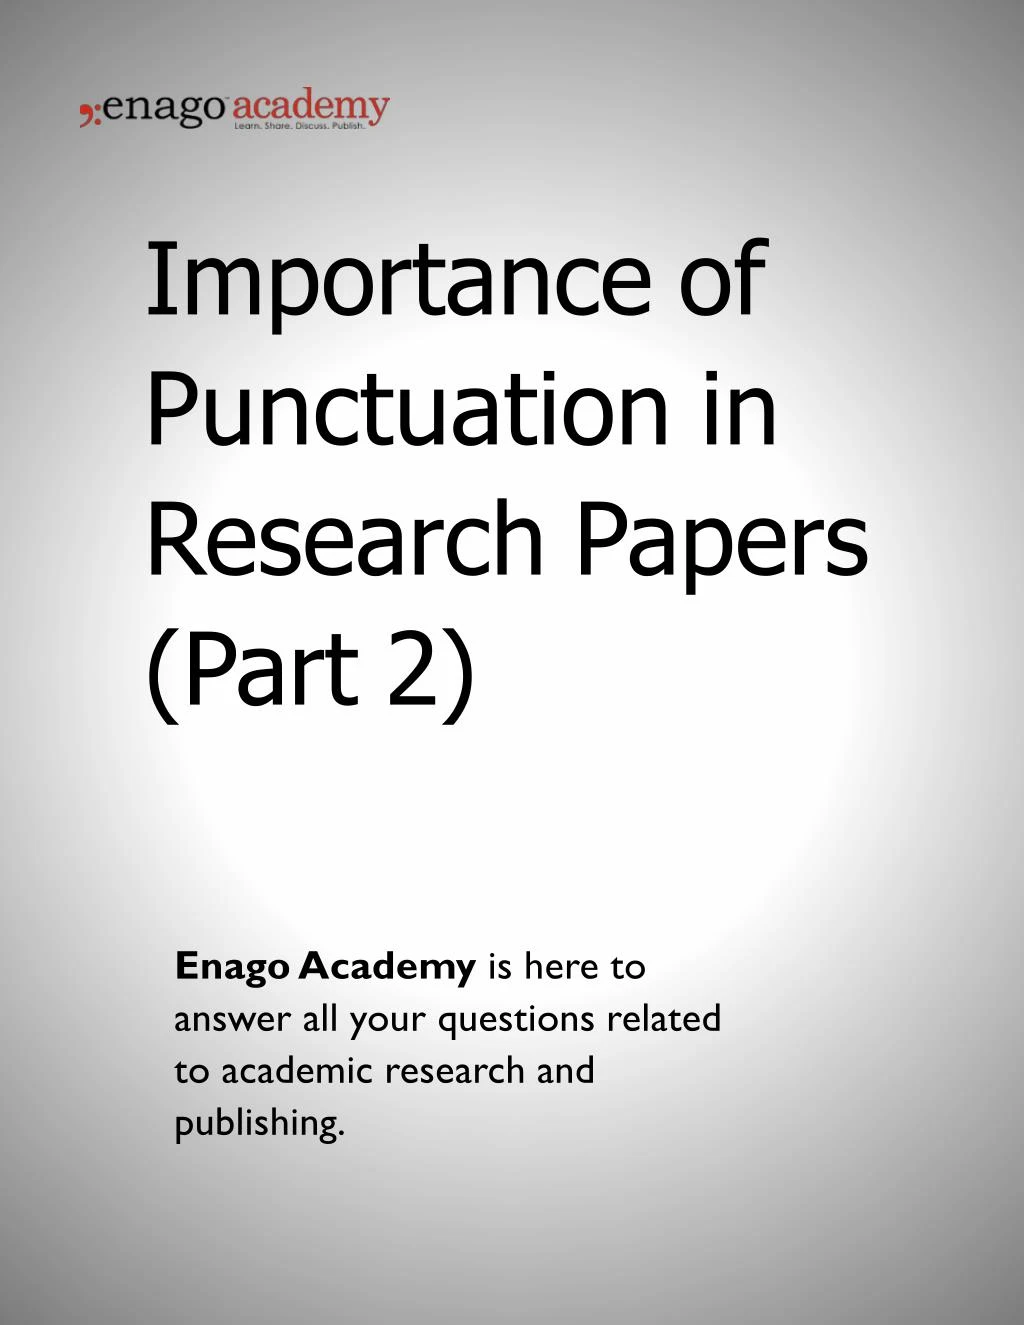 importance of punctuation in research papers part